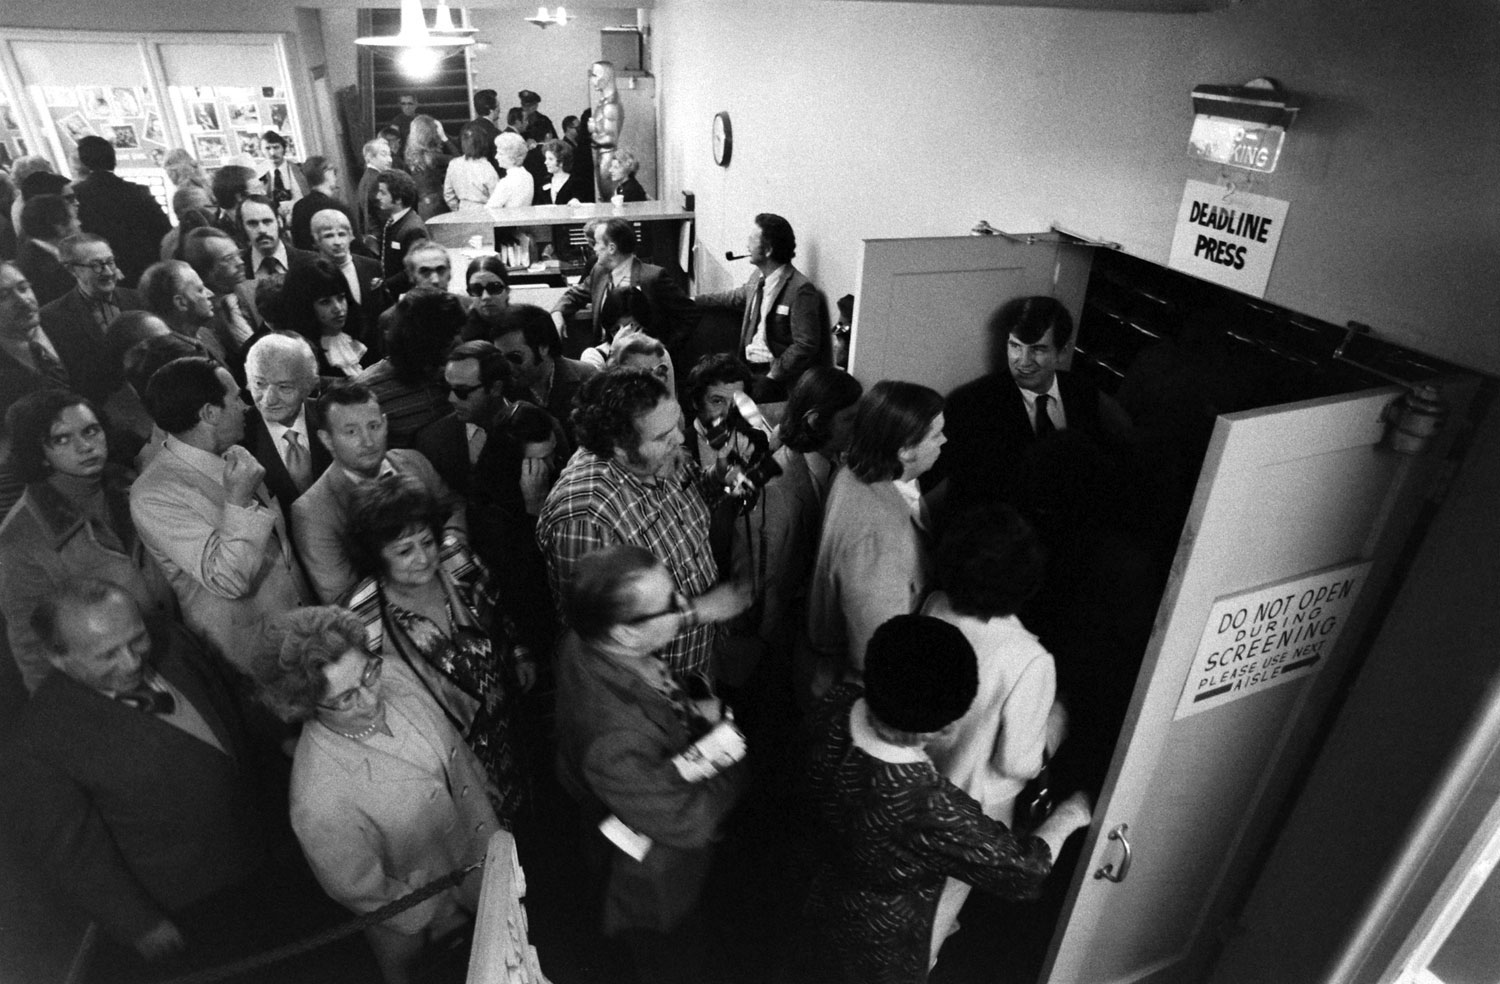 Members of the Academy enter an auditorium for a screening of an Oscar nominated film, 1972.